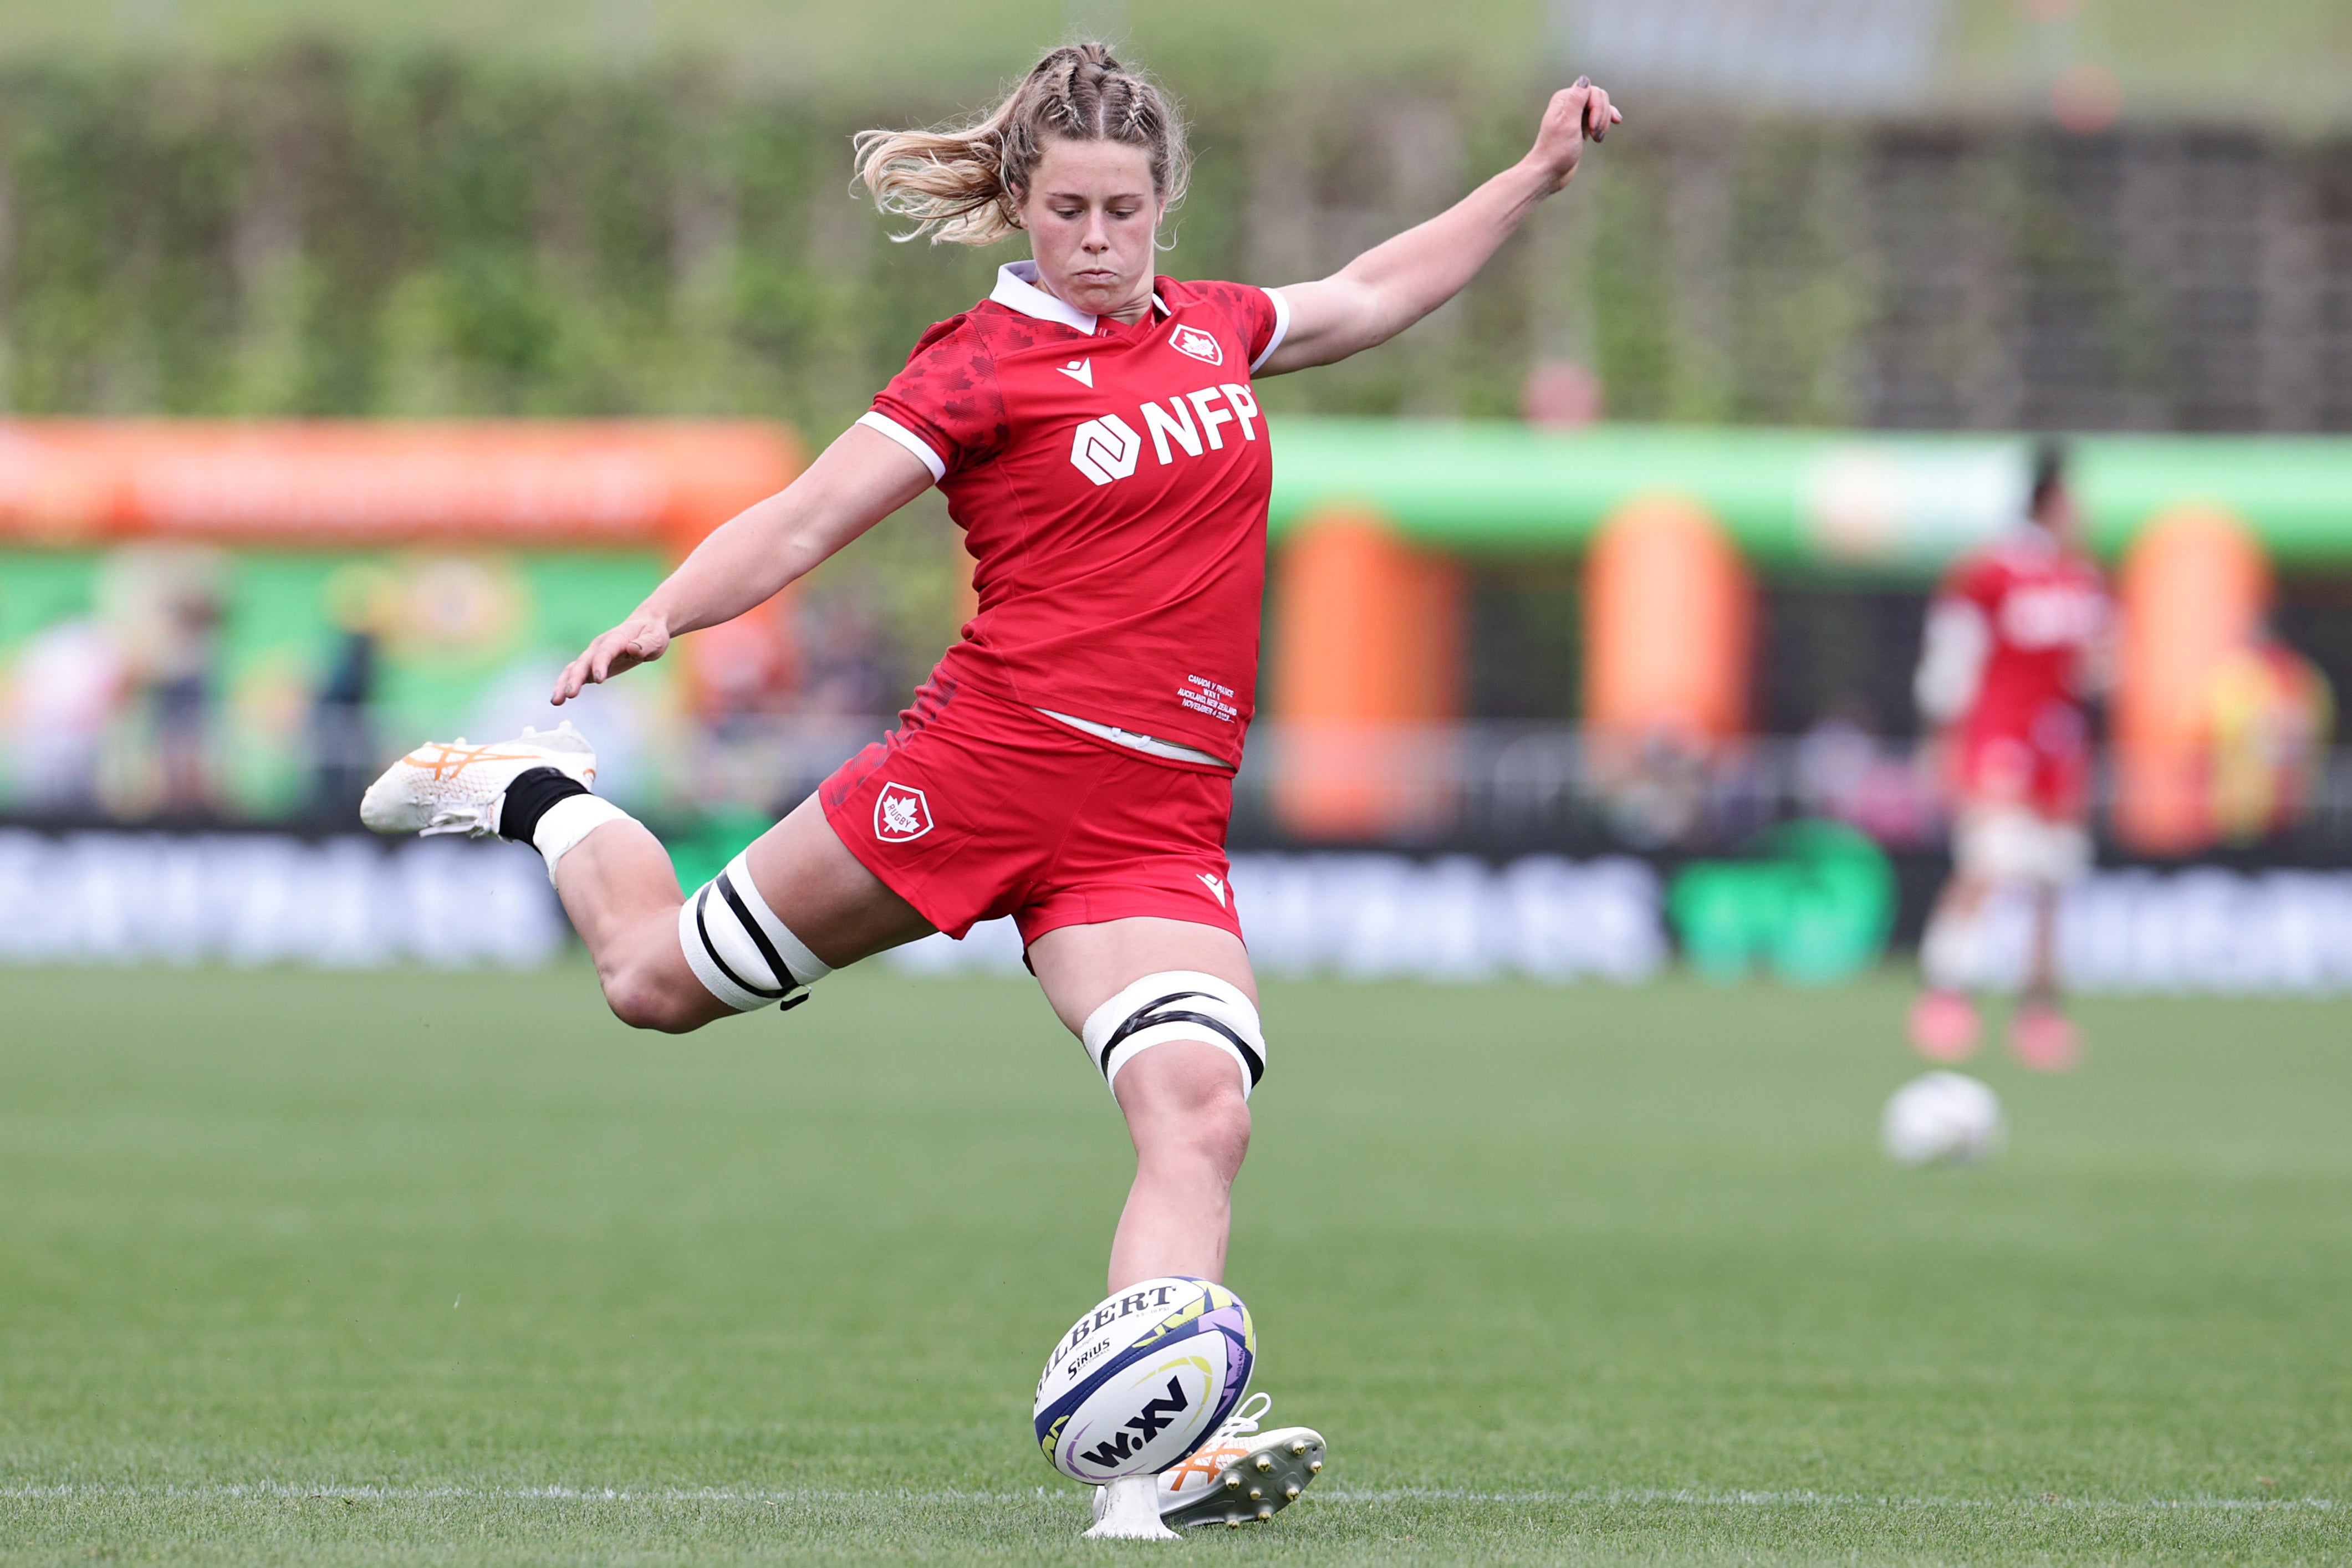 Canada captain Sophie de Goede is one of the world’s best players